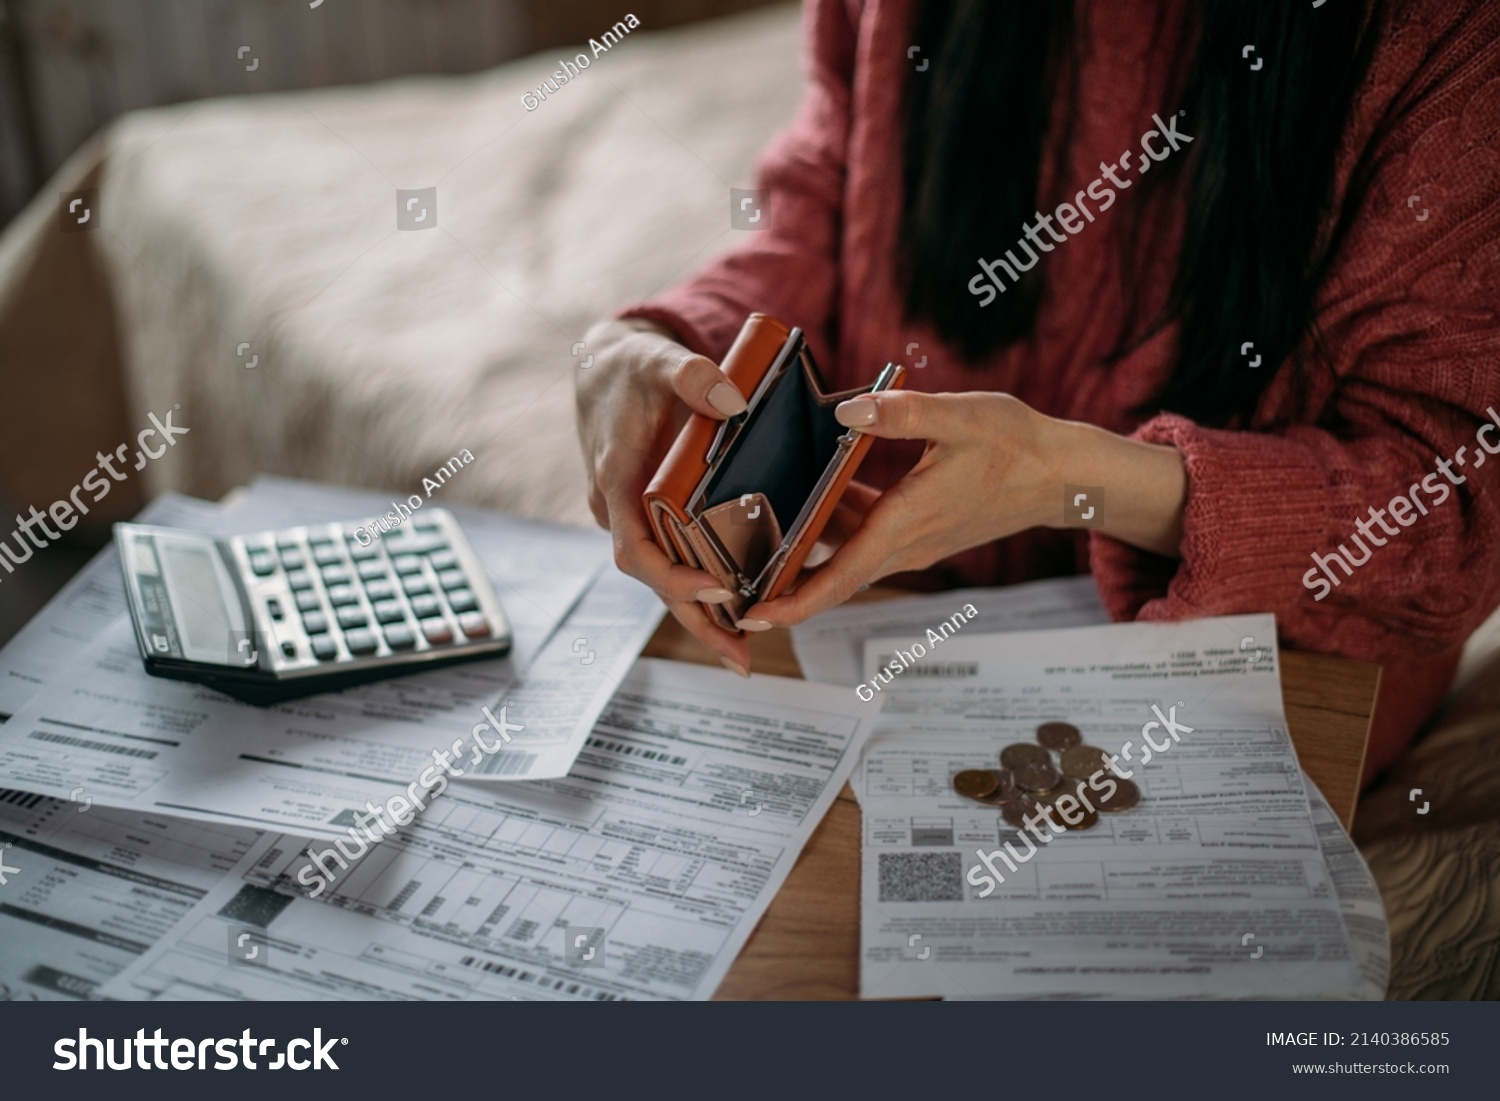 Close-up of woman's hands with empty wallet and utility bills. The concept of rising prices for heating, gas, electricity. Many utility bills, coins and hands in a warm sweater holding an open wallet #2140386585